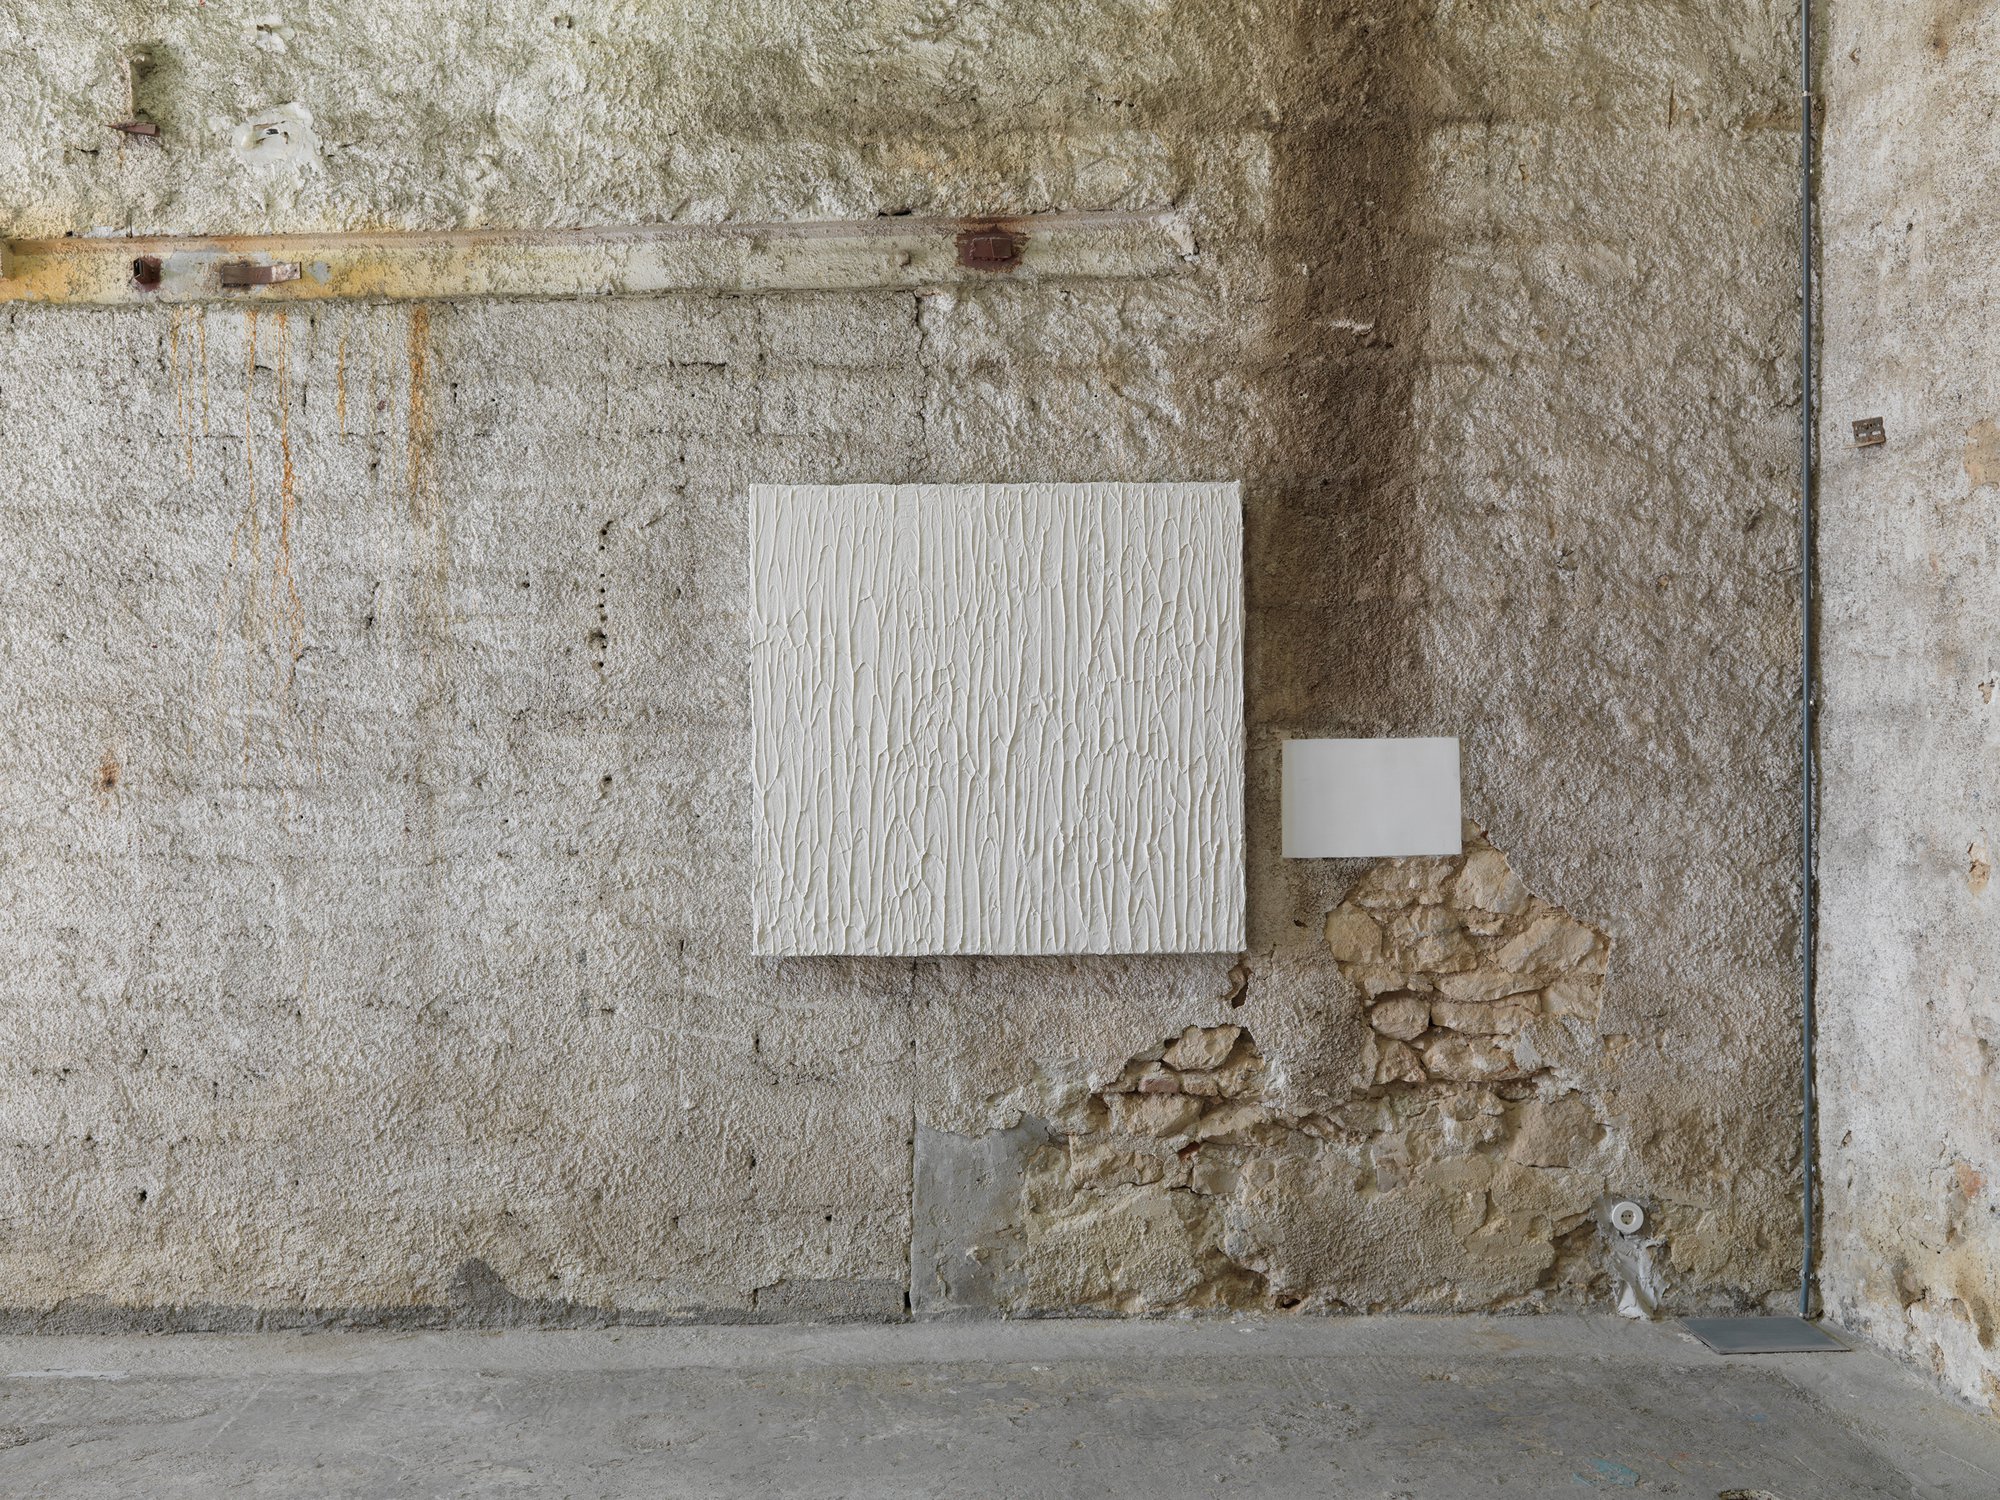 Christodoulos Panayiotou, Untitled (Sagre), sagre acrylic finish, wall paint, foam board, mortar, wooden frame, 127.5 x 121.5 x 6 cm, 2021